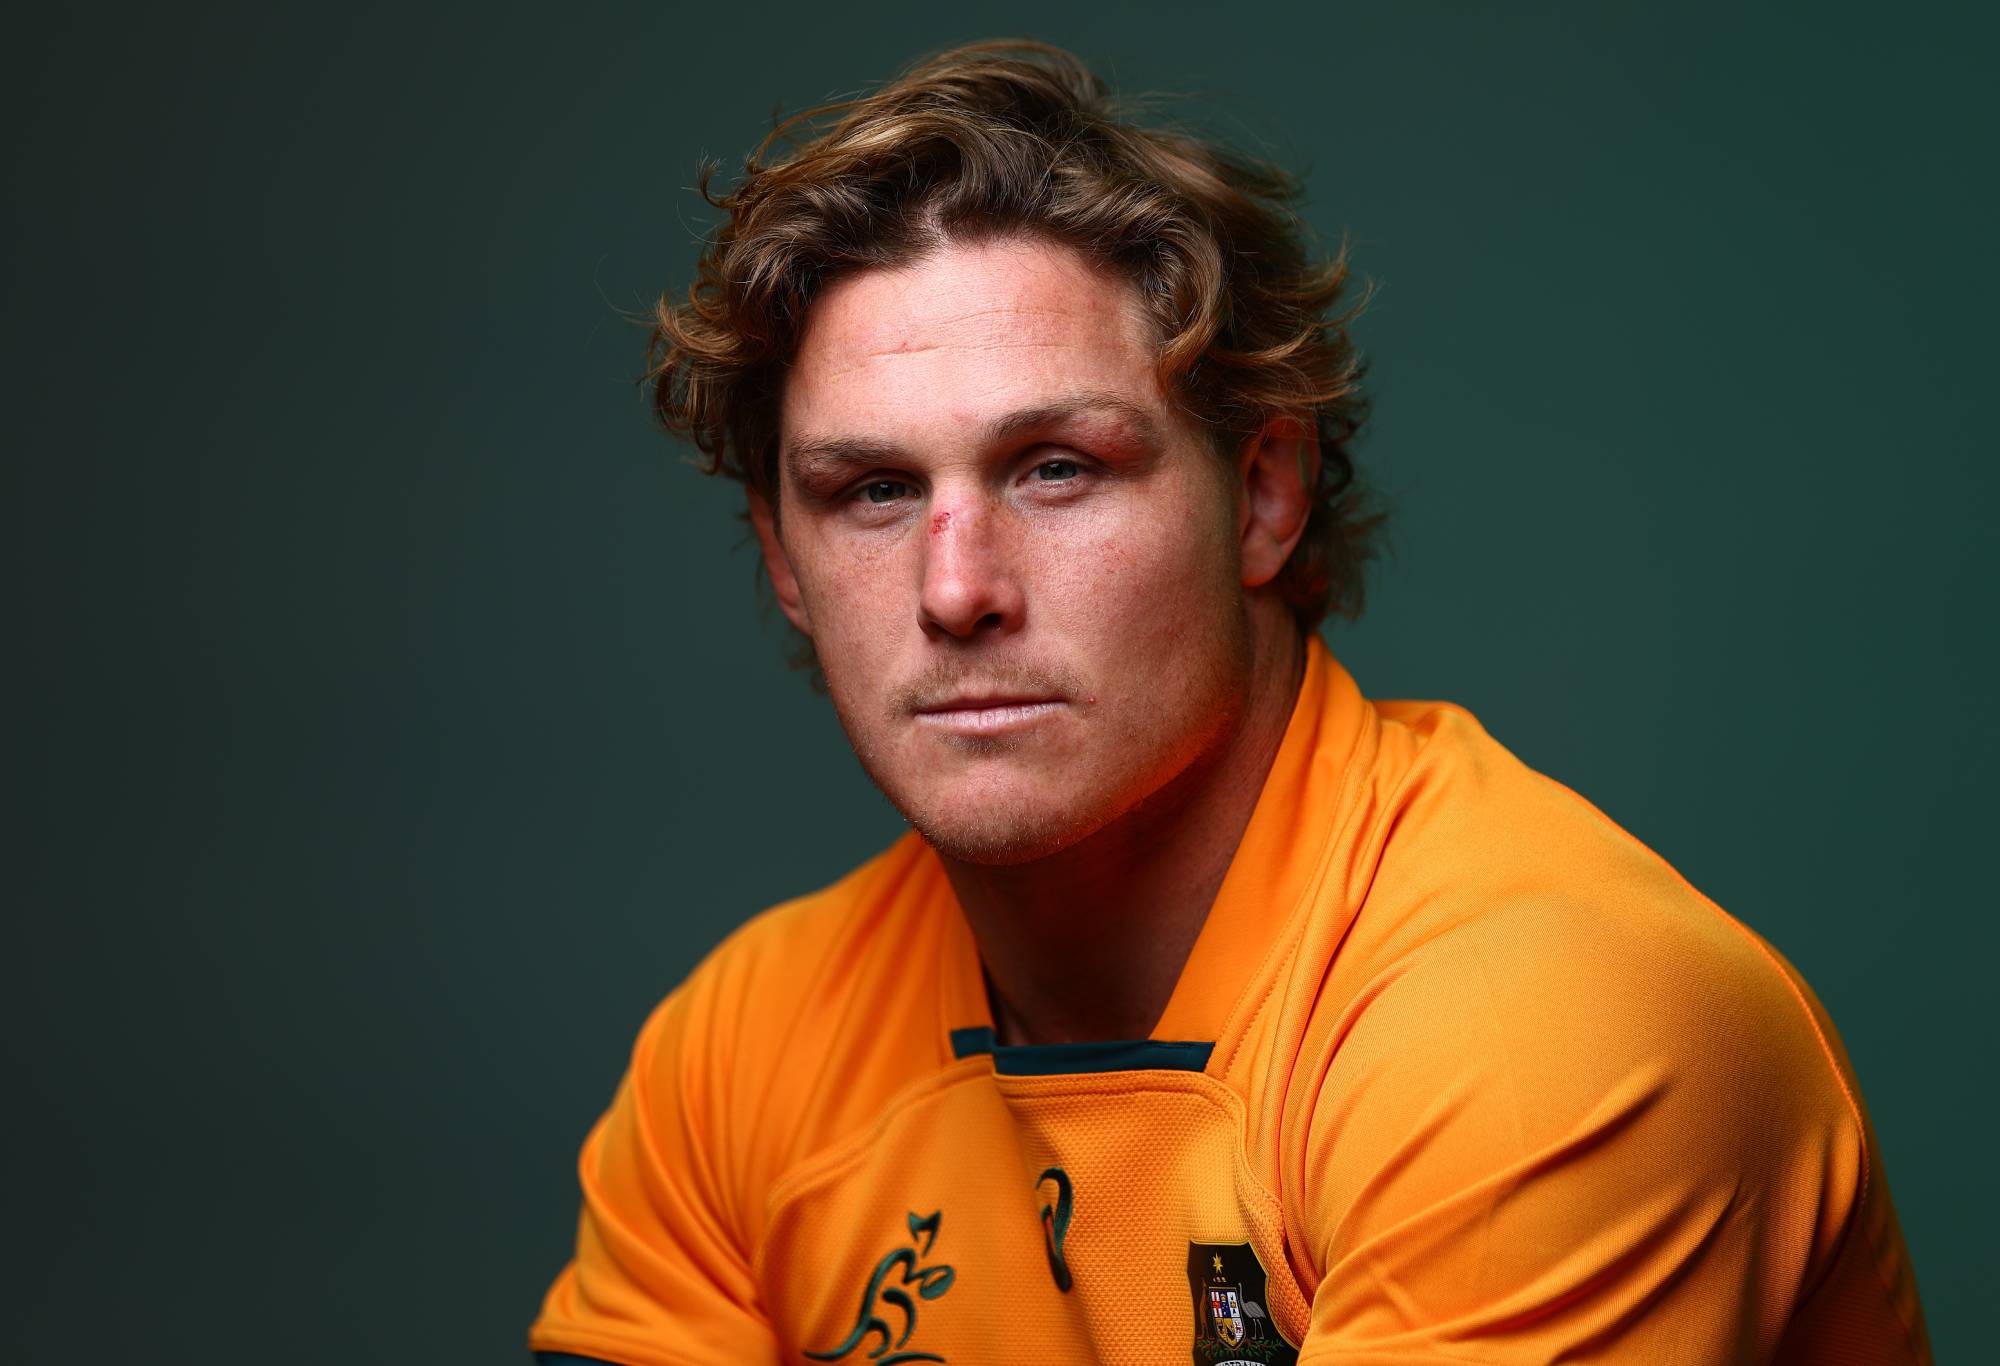 Michael Hooper poses during the Australian Wallabies 2022 team headshots session on June 24, 2022 in Sunshine Coast, Australia. (Photo by Chris Hyde/Getty Images for Rugby Australia)